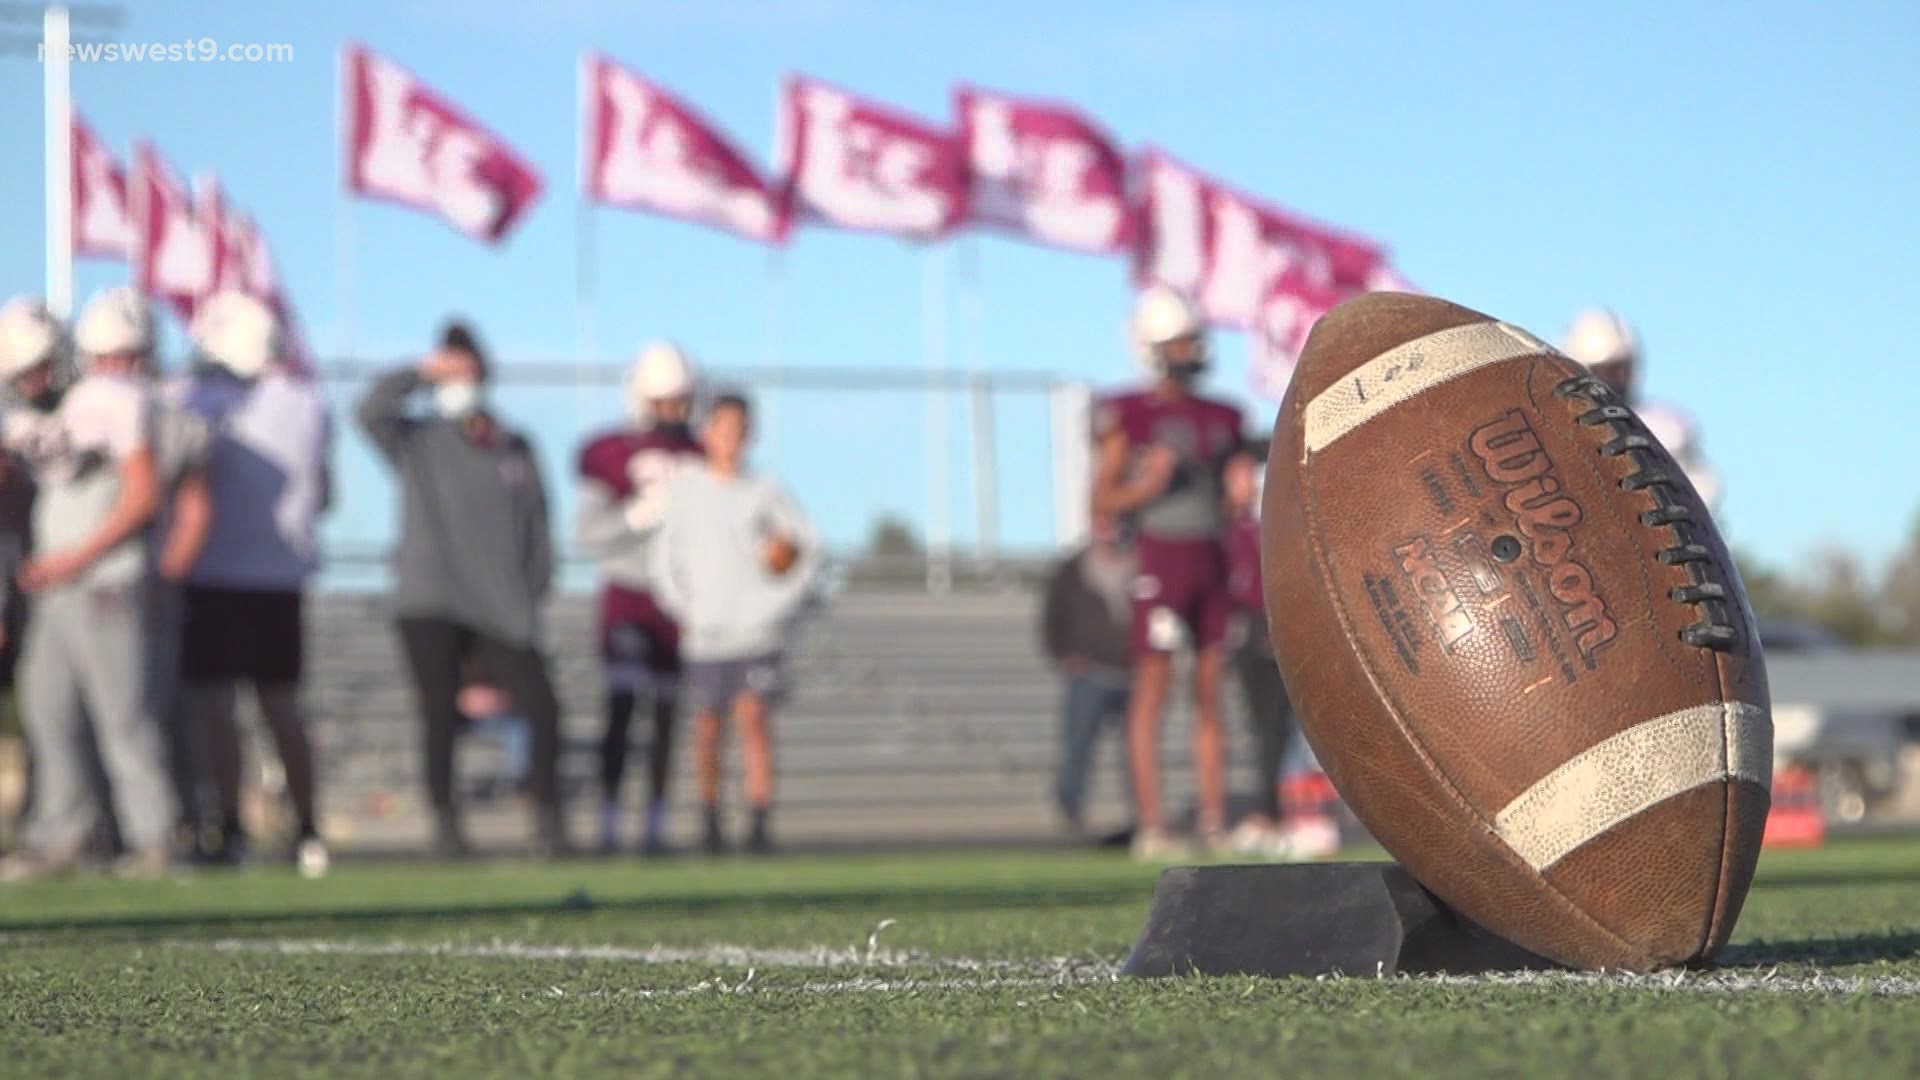 The Dave Campbell's Texas Football Community Connection School of the Year recognizes those schools that connect their communities in authentic ways.